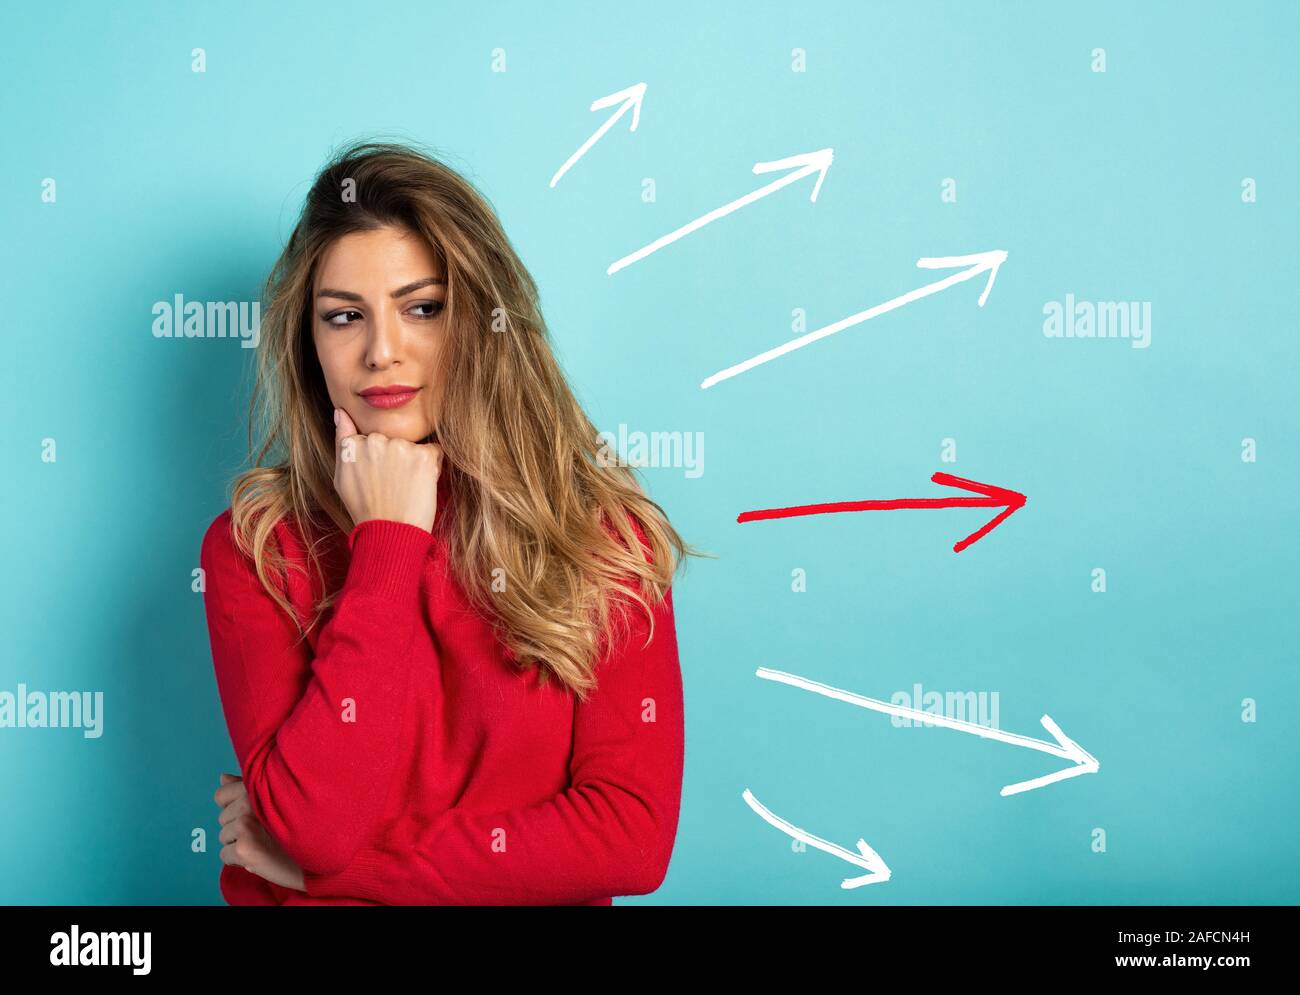 Confused woman have to choose the right arrow to follow. Concept of options, confusion, decision. Stock Photo